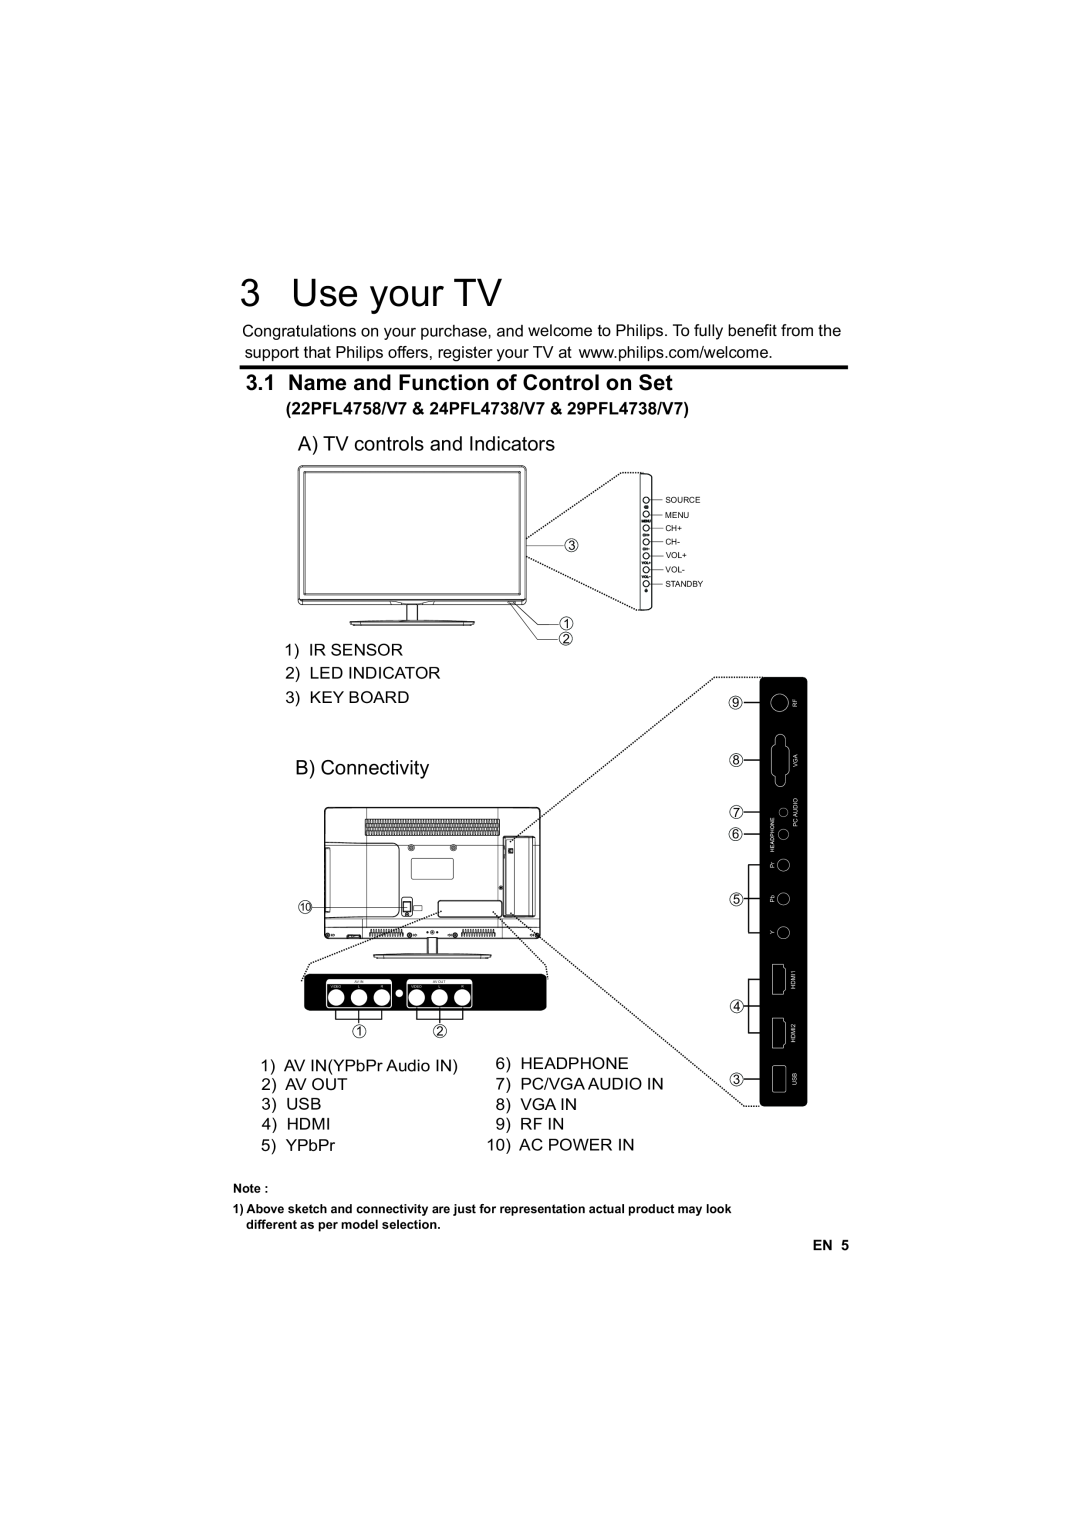 Philips 50PFL4758/V7 Use your TV, Name and Function of Control on Set, A TV controls and Indicators, B Connectivity 